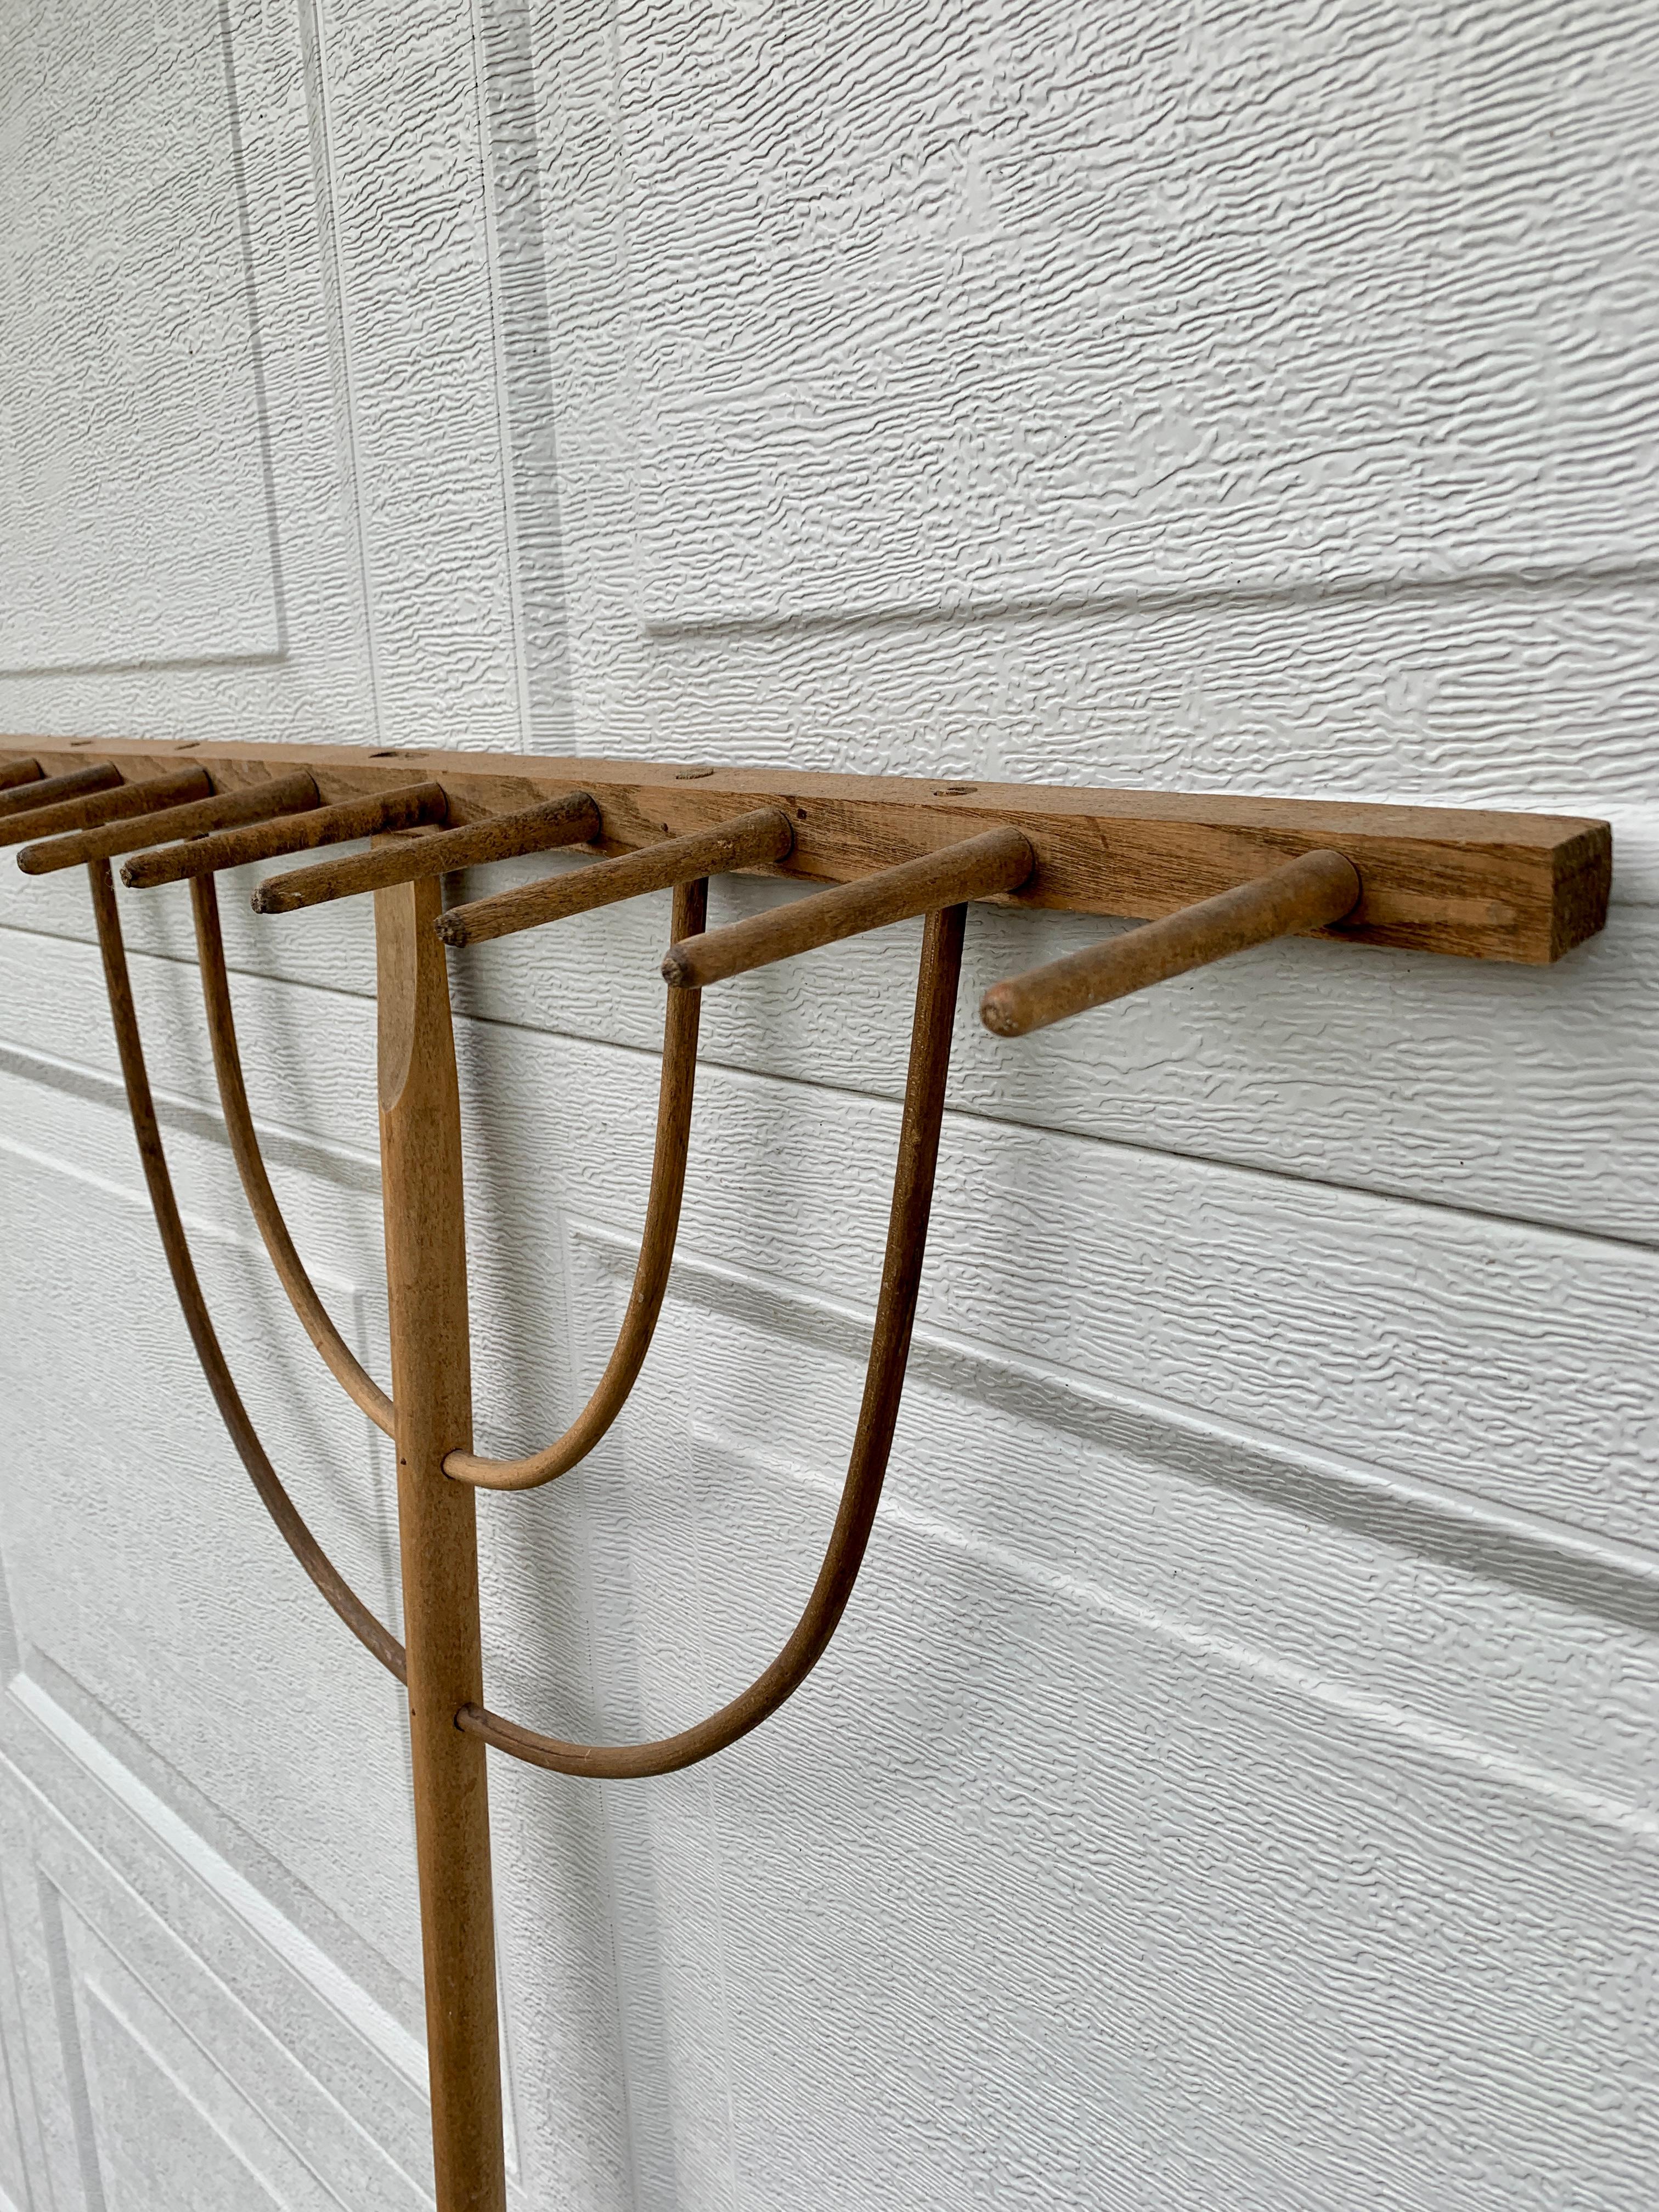 Late 19th Century Wooden Garden Tools, Set of Three In Good Condition For Sale In Elkhart, IN